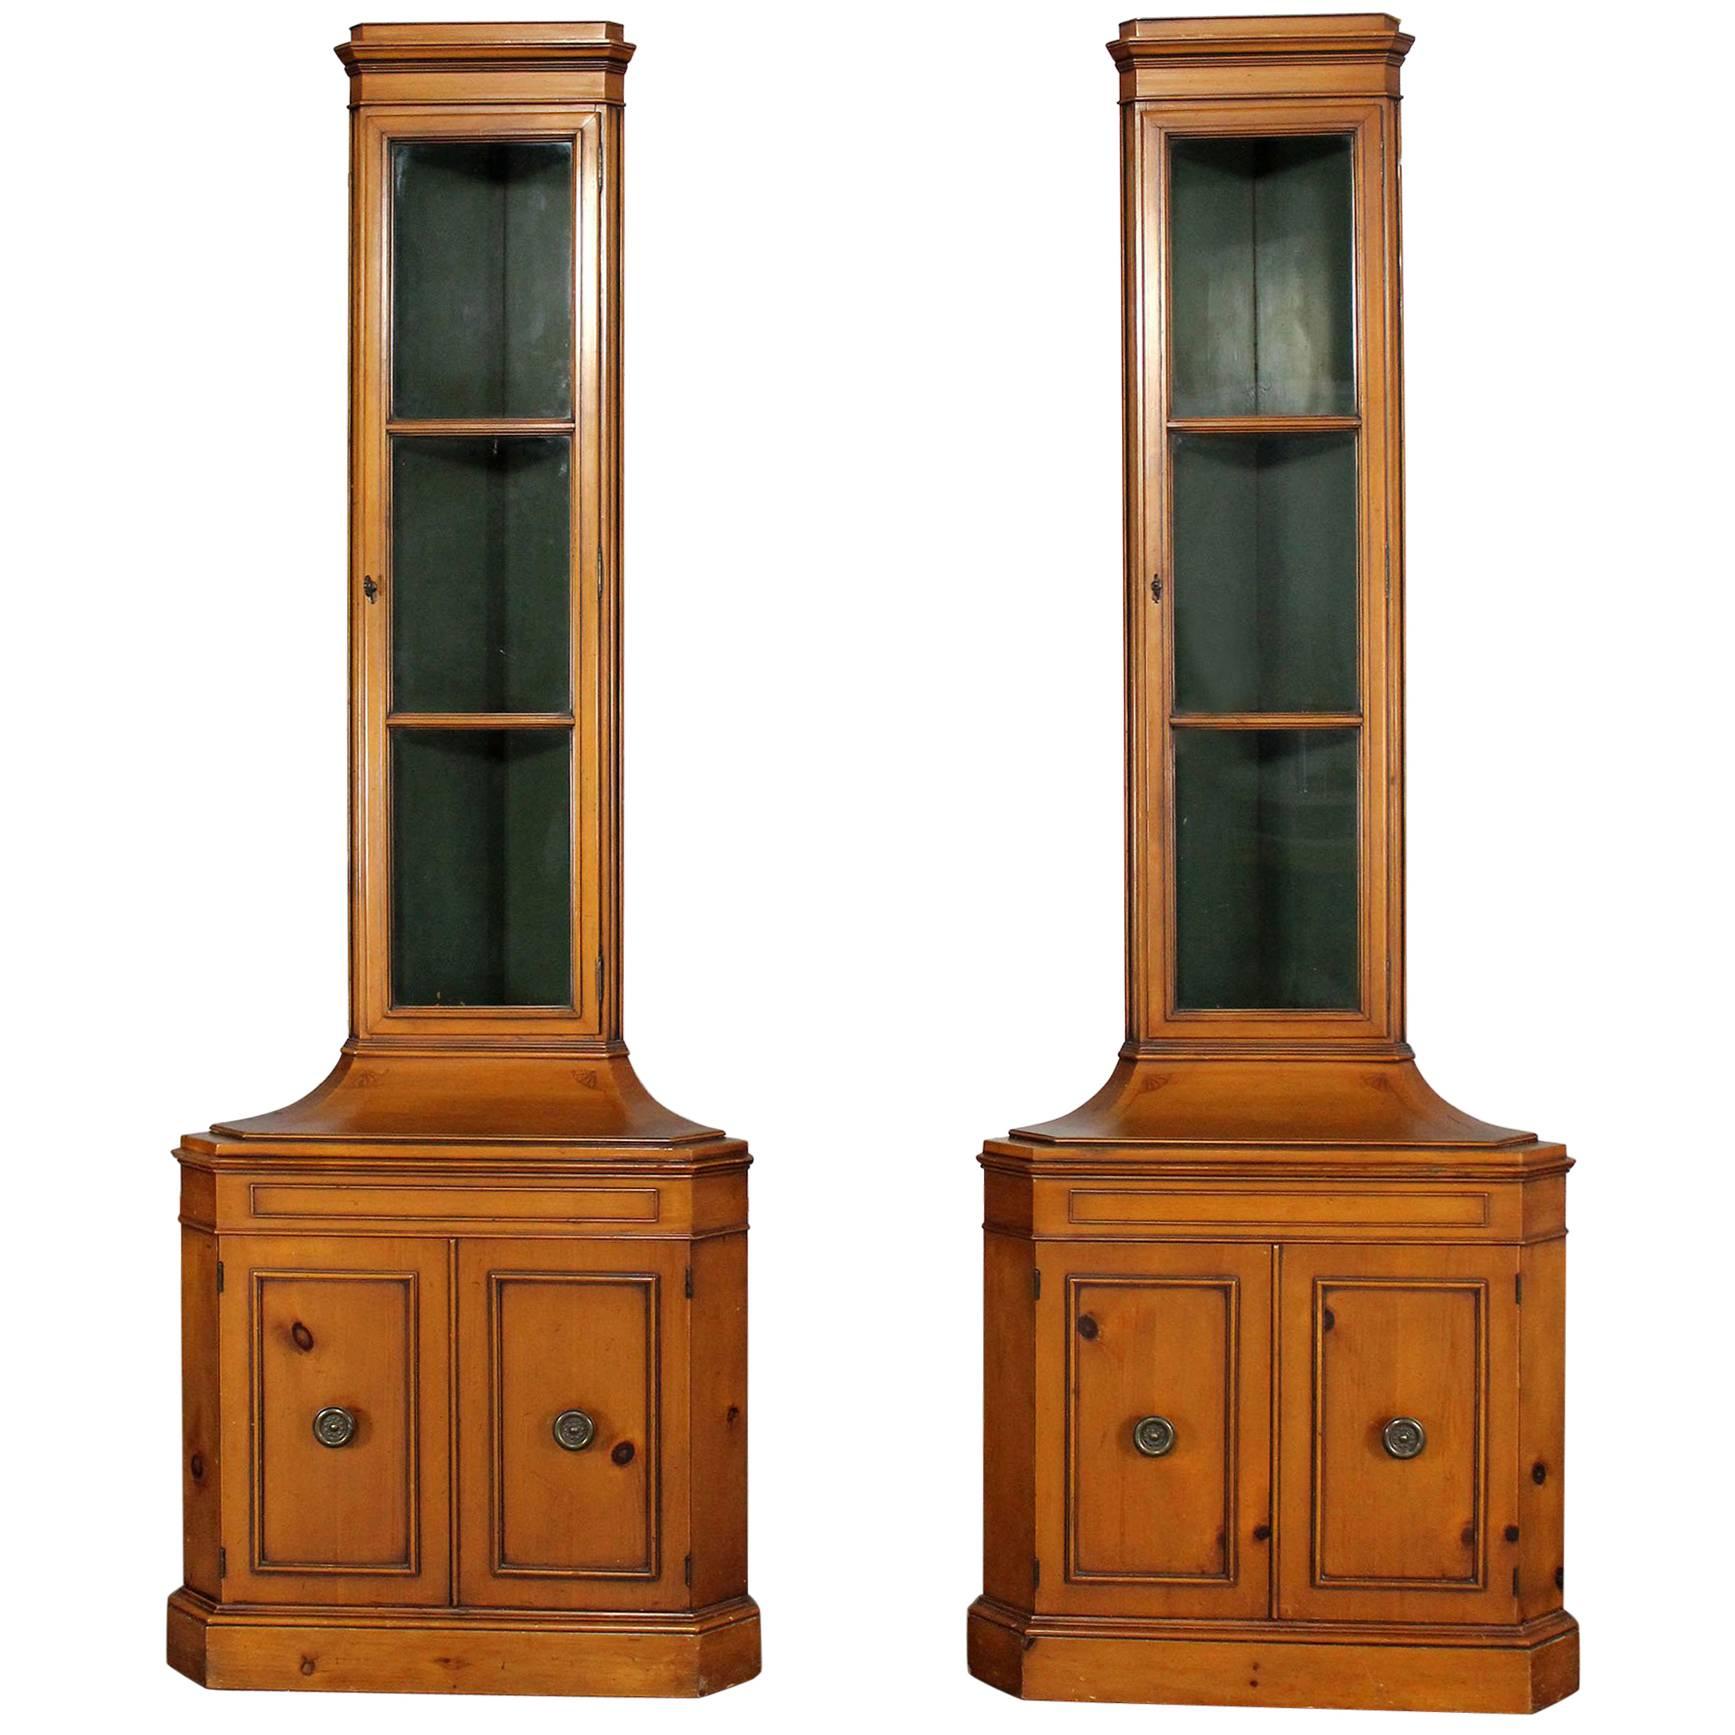 Knotty Pine Distressed Corner Cabinets Pair by Weiman Heirloom Quality Tables